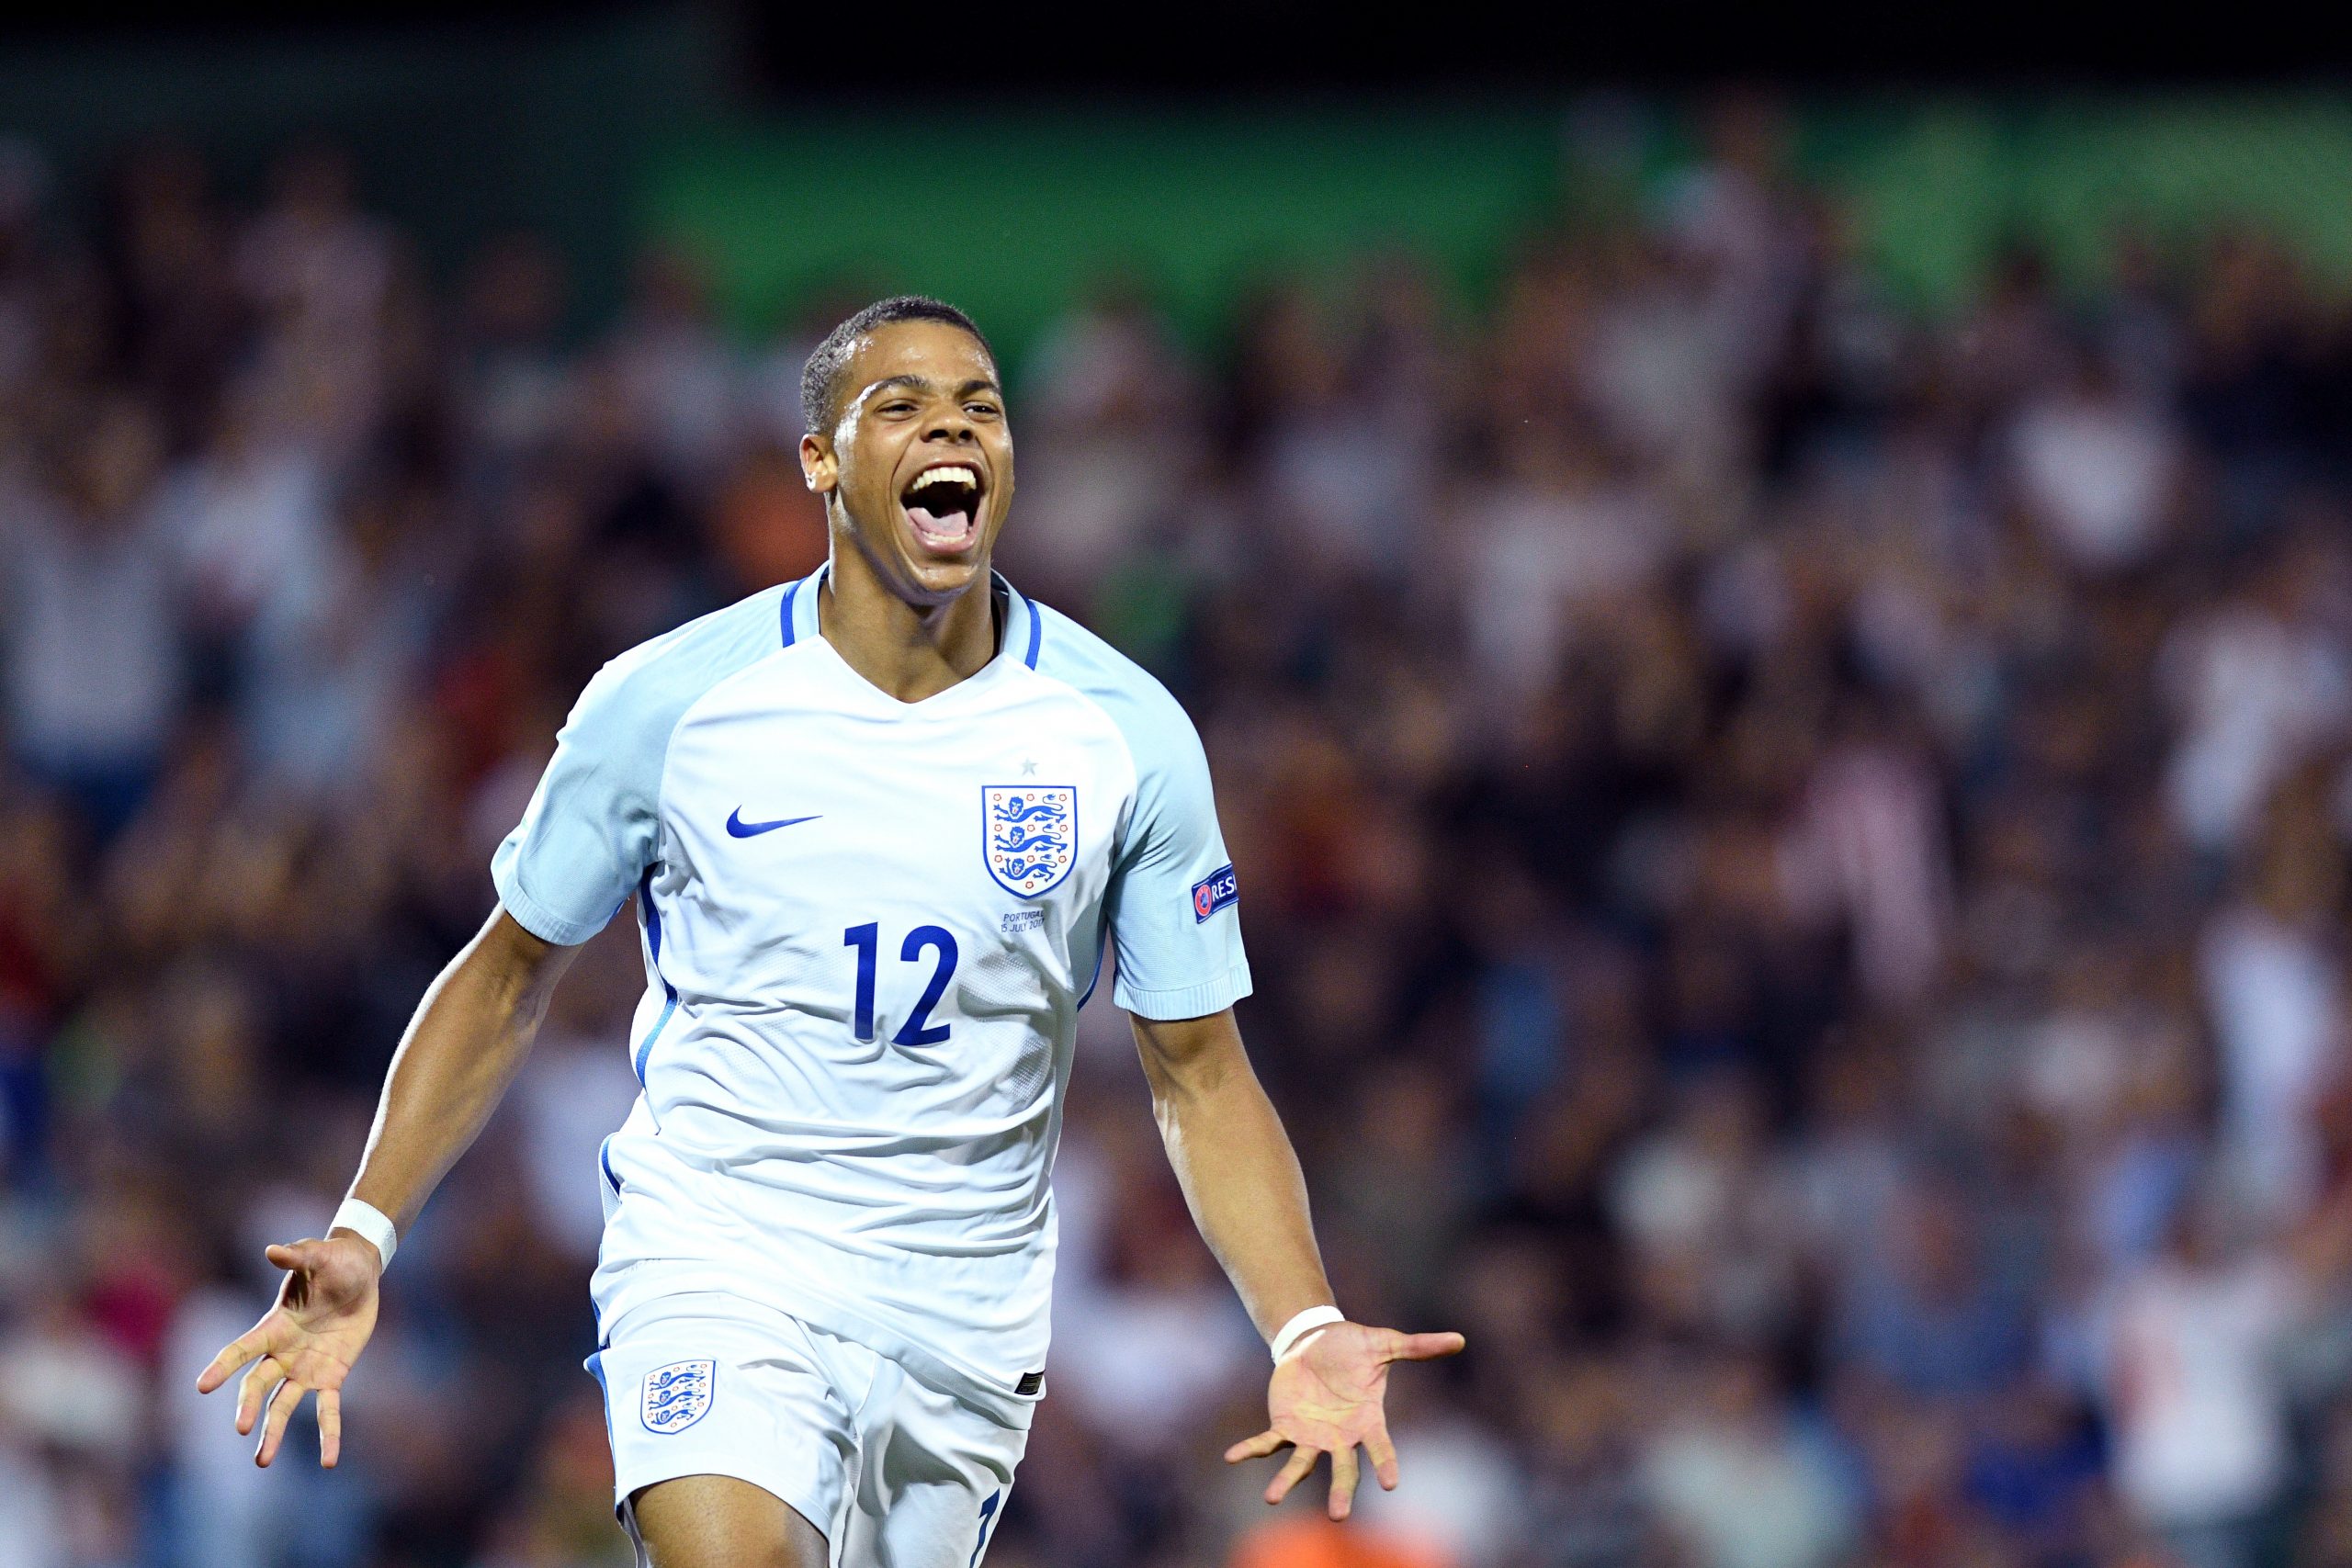 Lukas Nmecha played a key role in England's U19 European Championship win in 2017 (Getty Images)